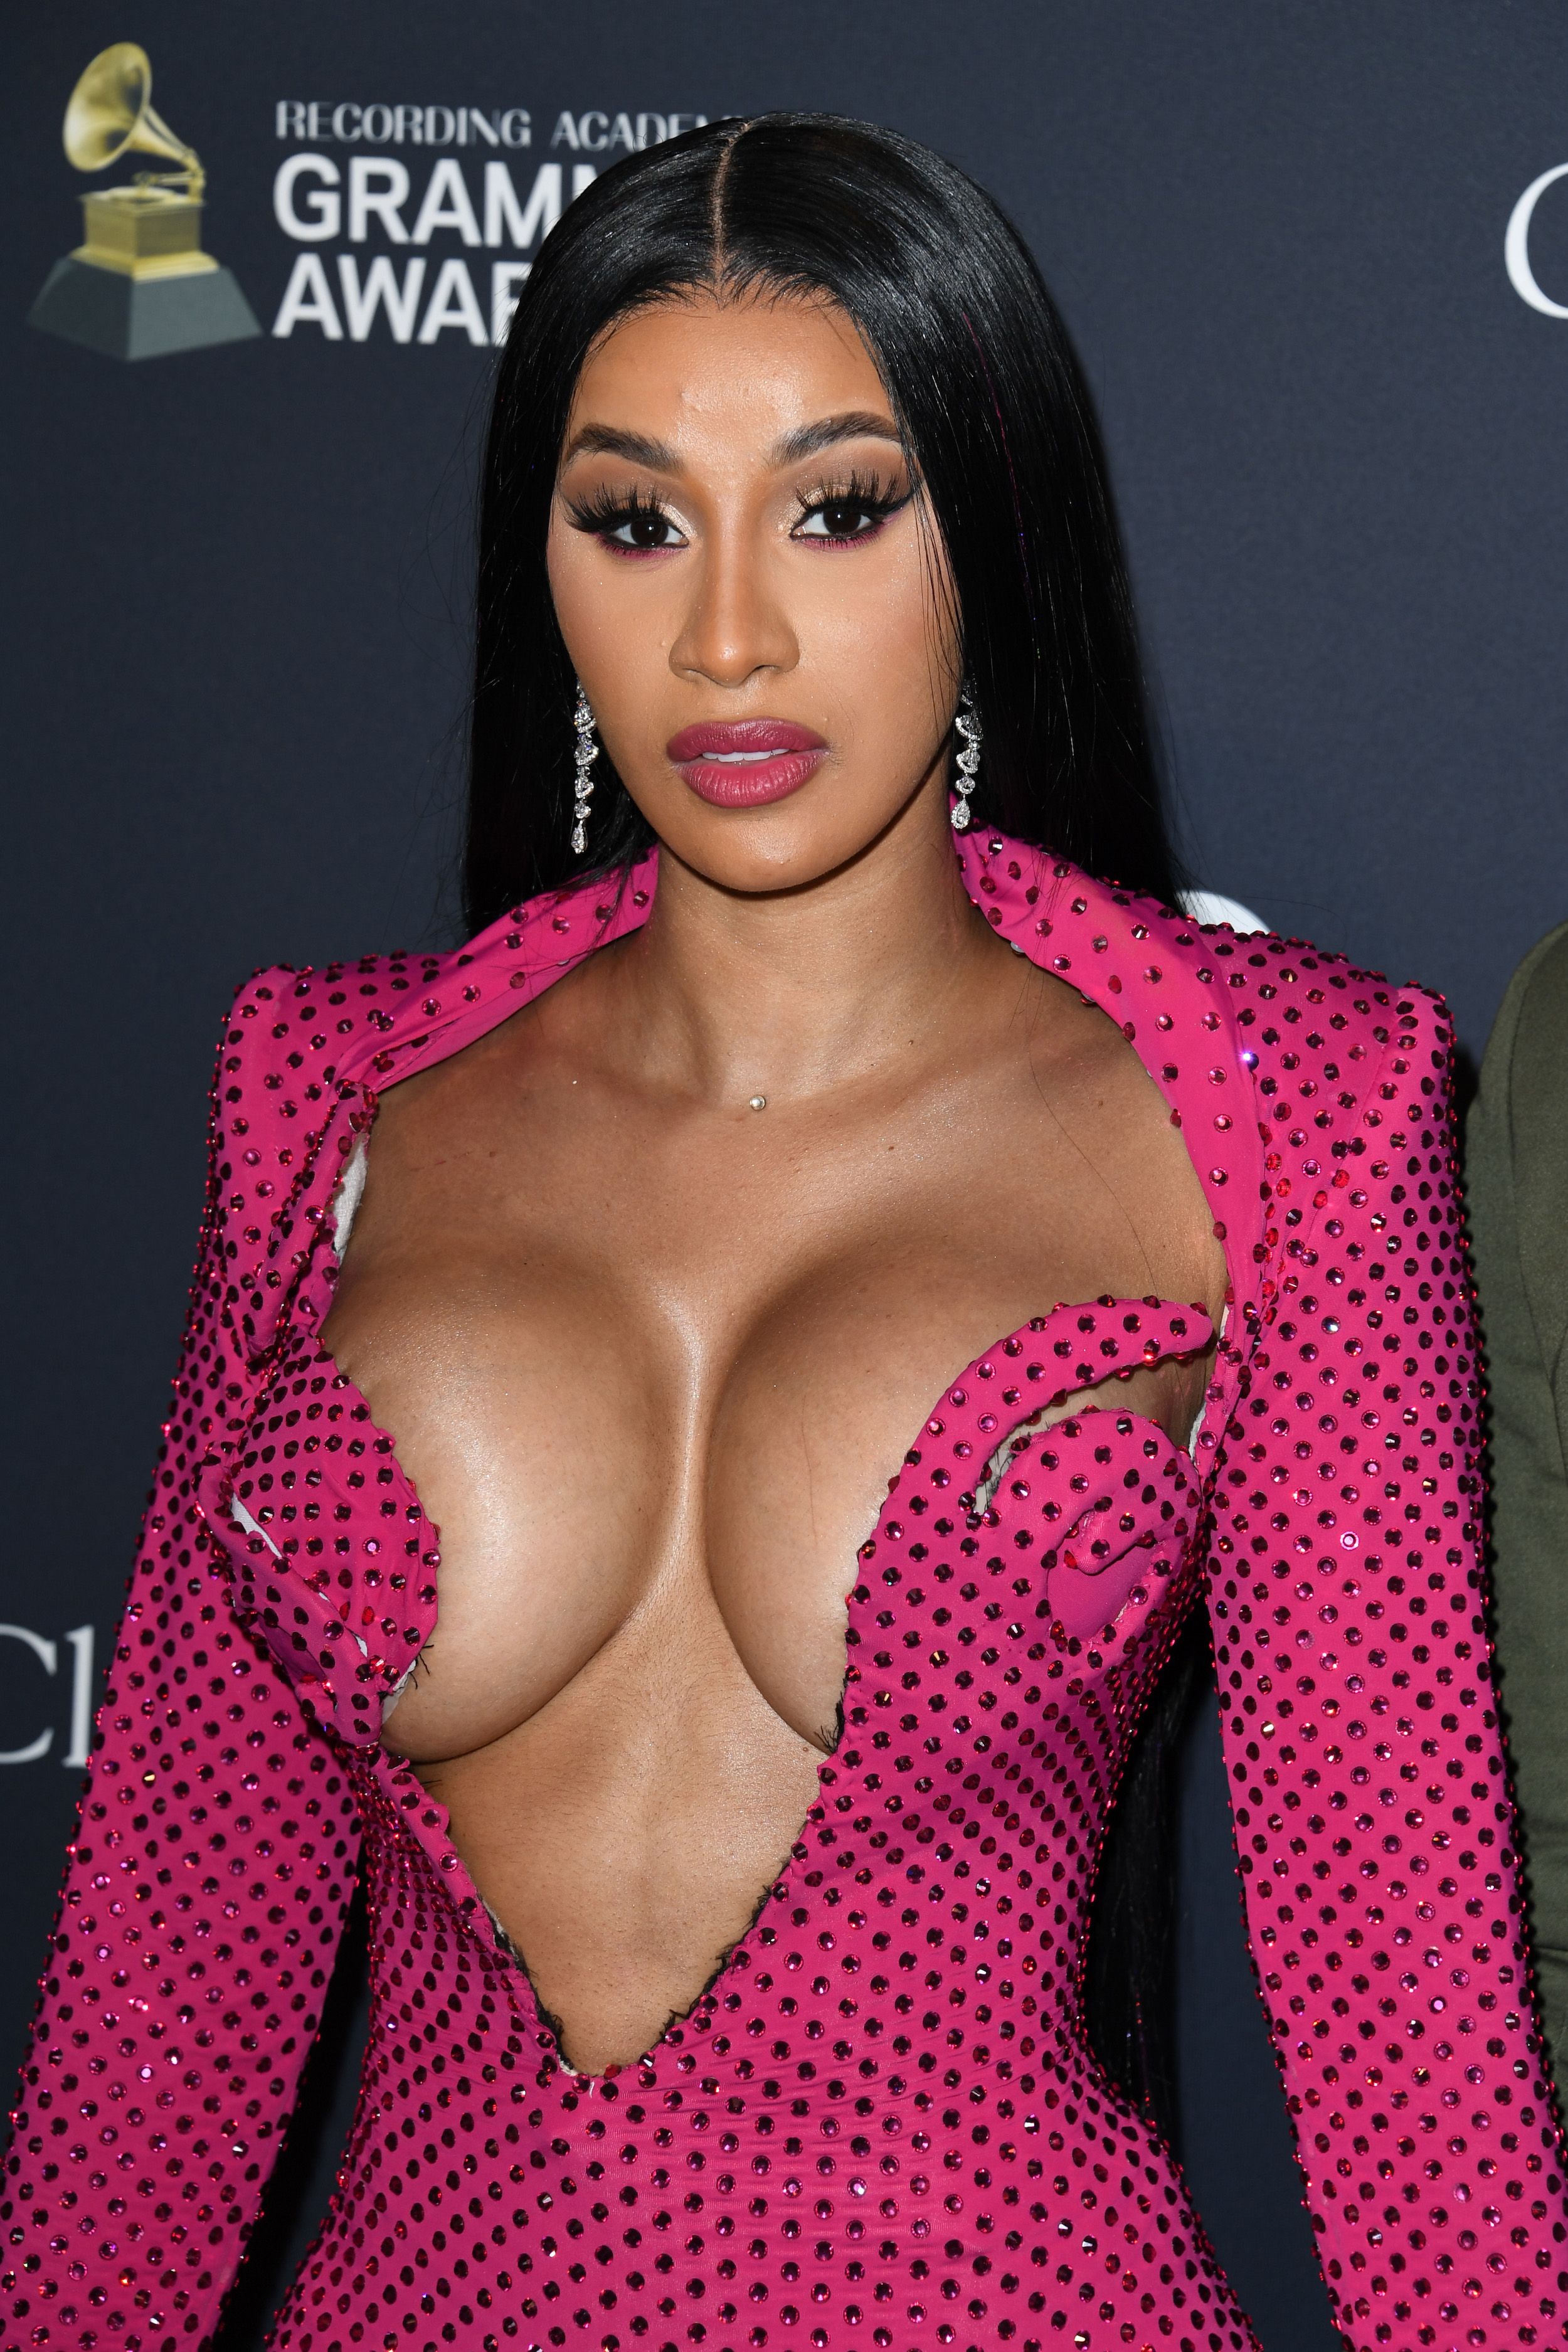 demarcus hall recommends cardi b phat ass pic